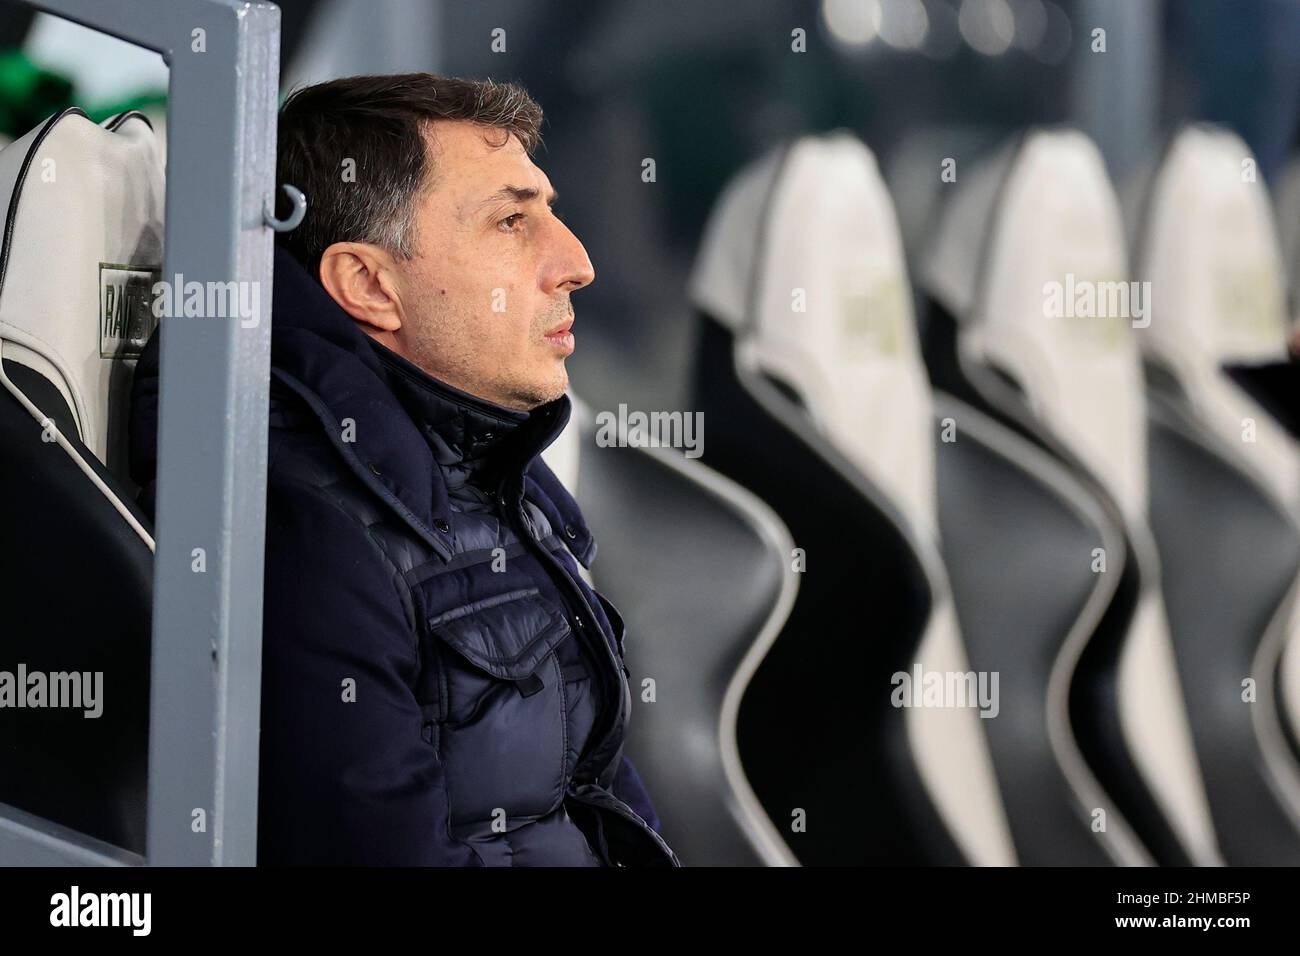 Derby, UK. 08th Feb, 2022. Shota Arveladze the Hull City manager waits in the dug out ahead of the game in Derby, United Kingdom on 2/8/2022. (Photo by Conor Molloy/News Images/Sipa USA) Credit: Sipa USA/Alamy Live News Stock Photo